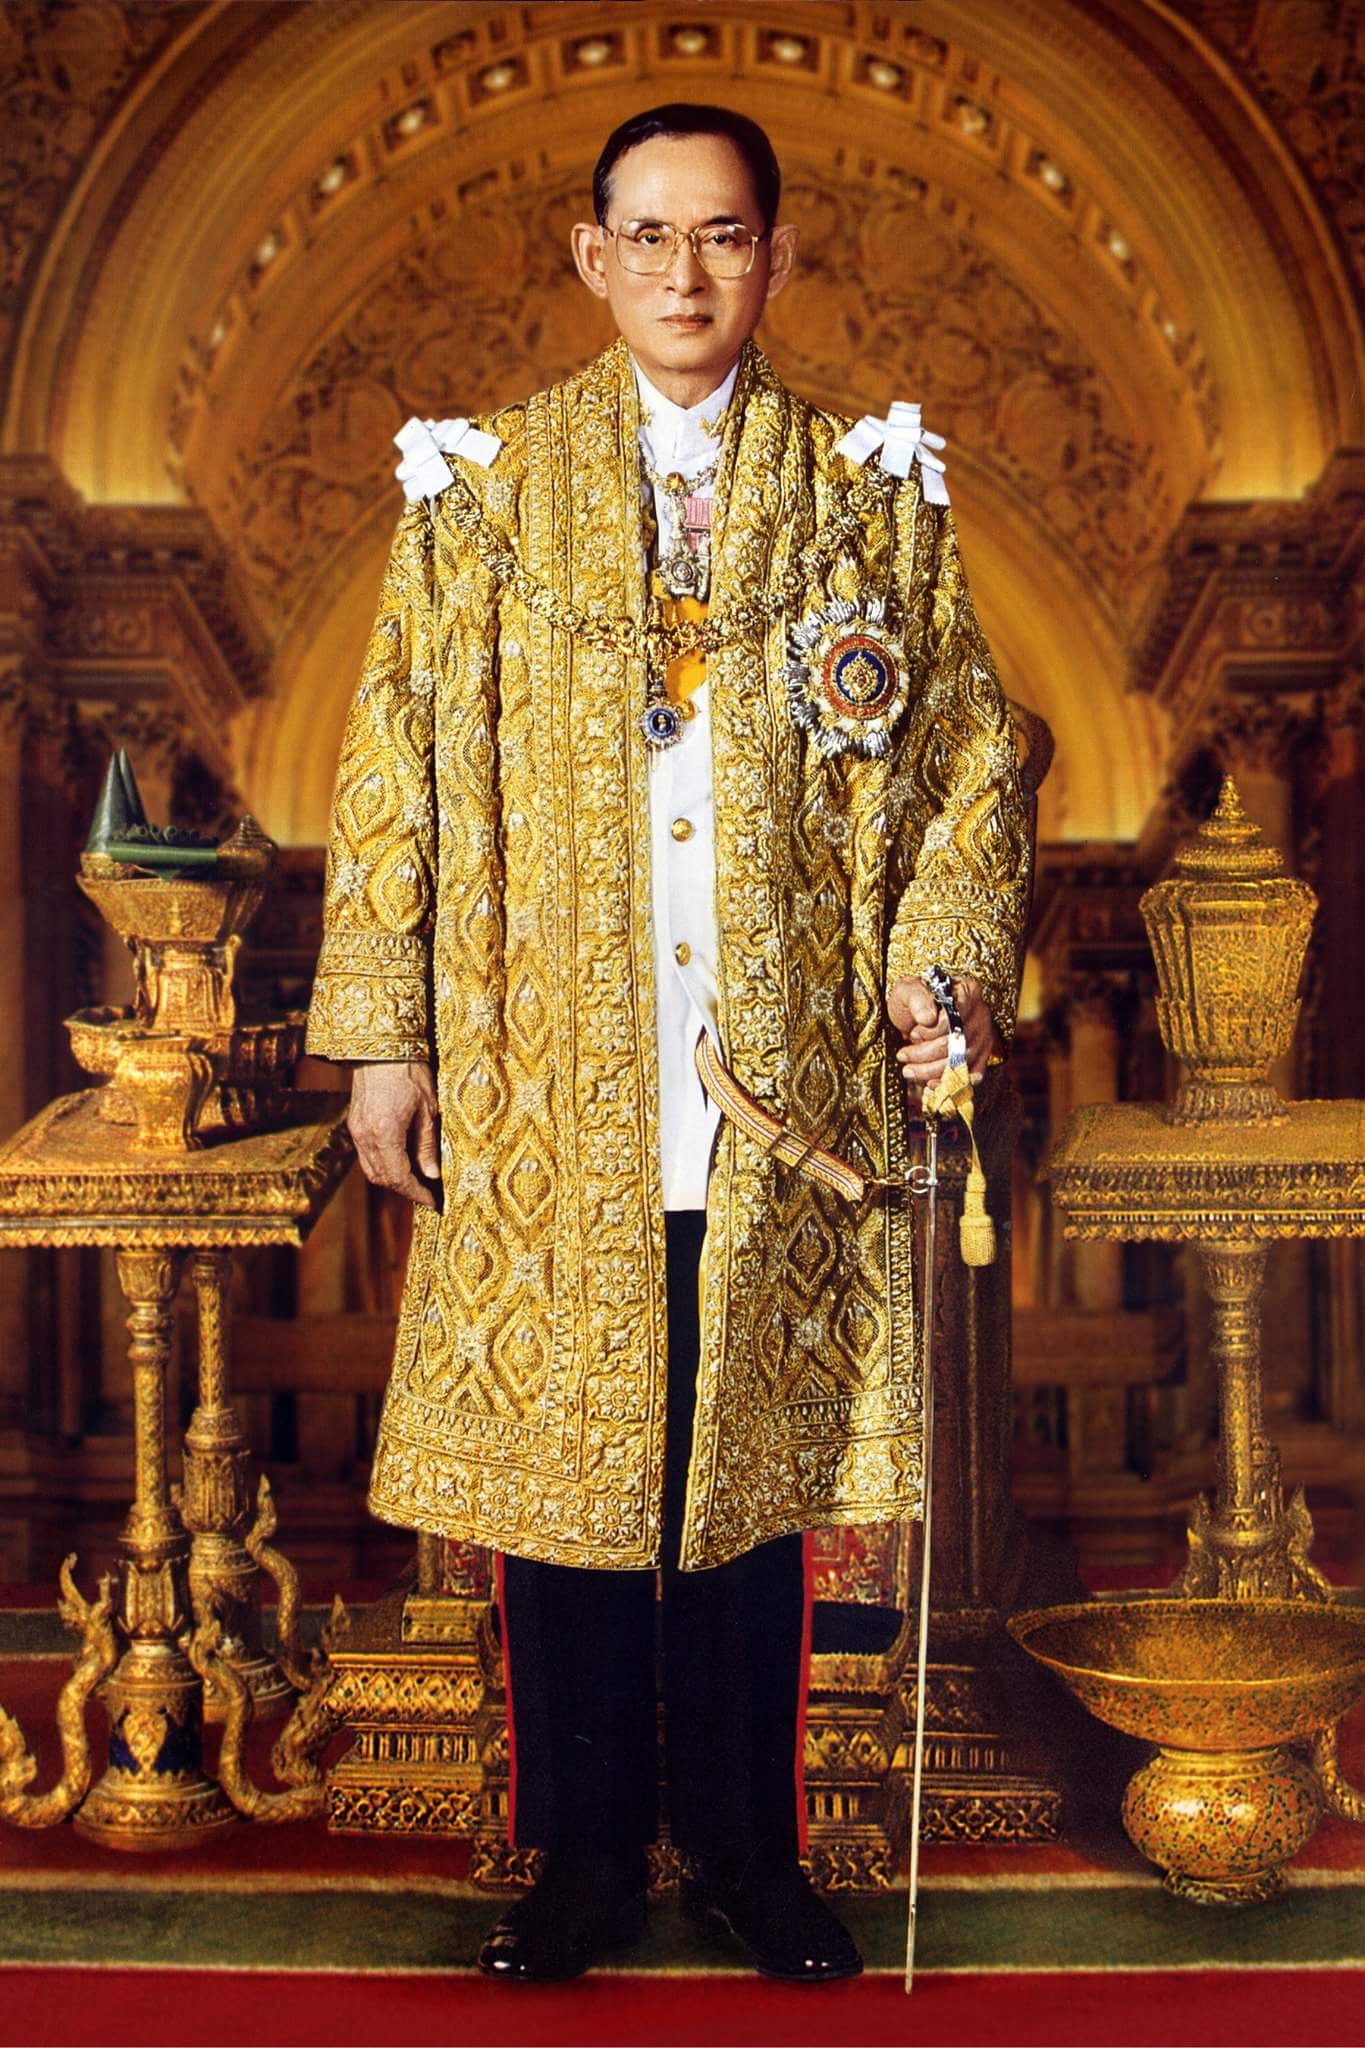 His Majesty the King's Birthday Anniversary 5 December 2009